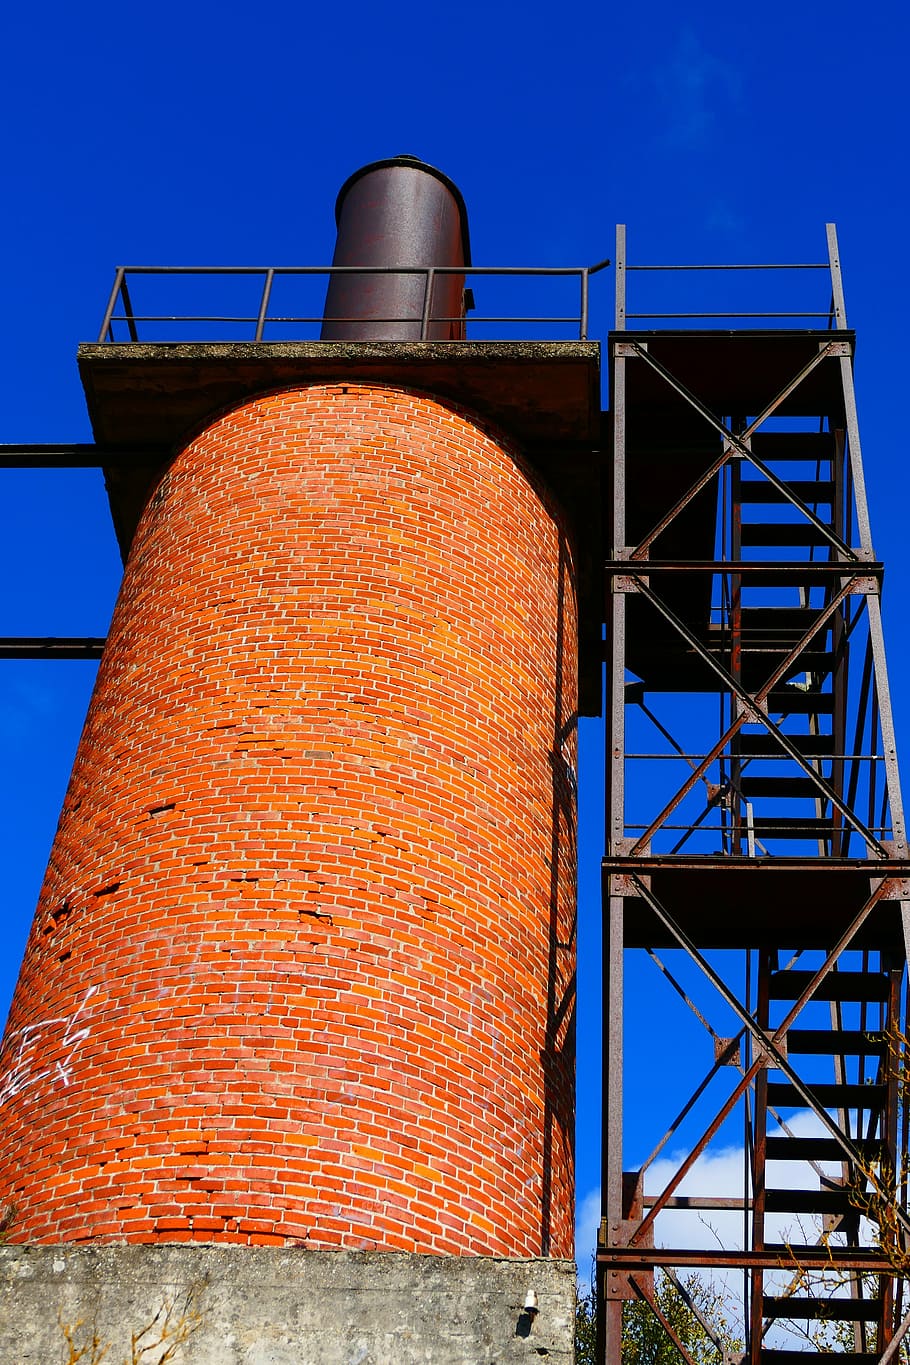 chimney, industry, fireplace, brick, tower, old, stairs, red, orange, factory